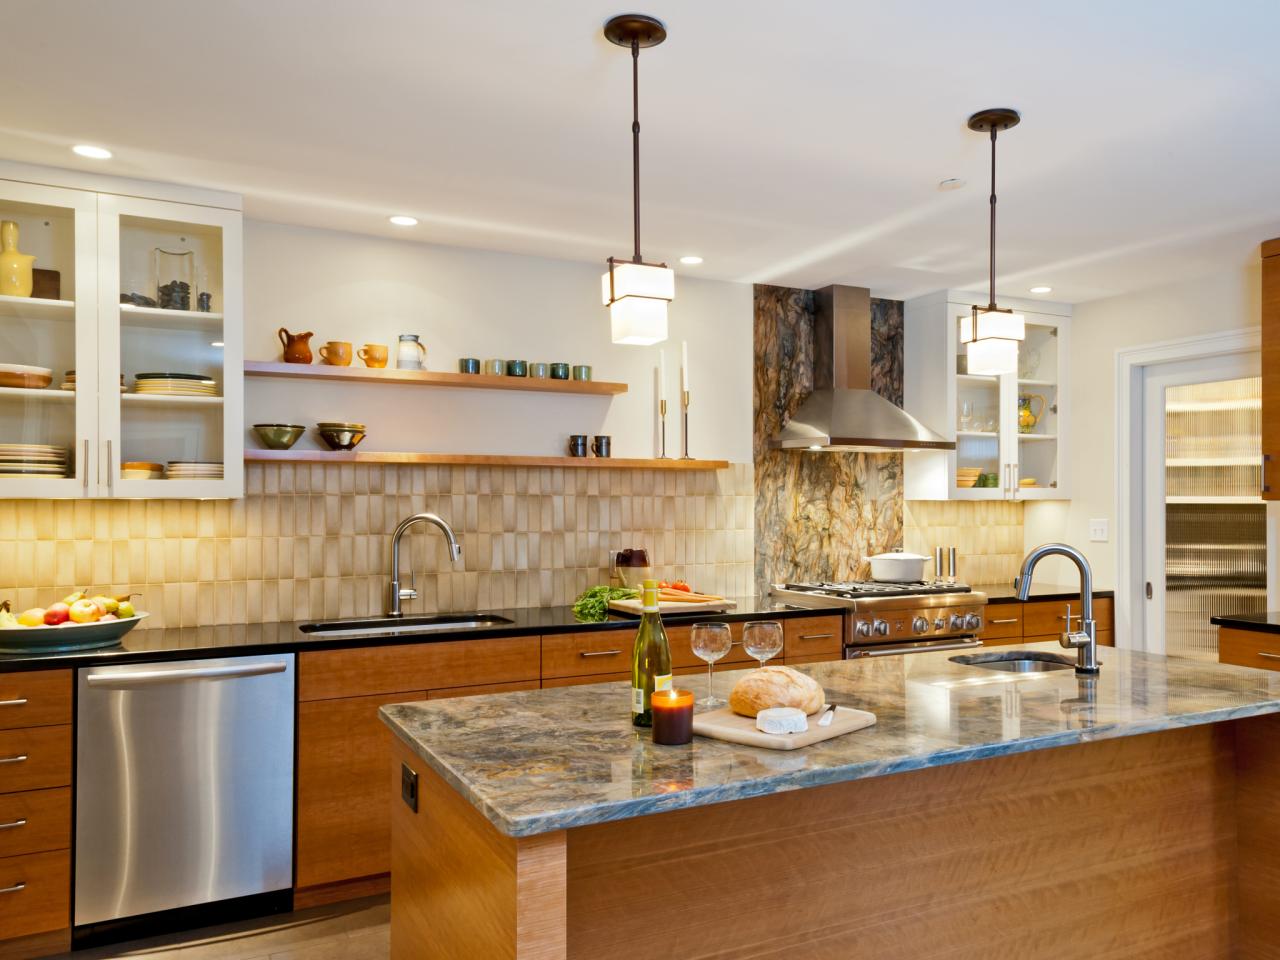 15+ Design Ideas for Kitchens Without Upper Cabinets